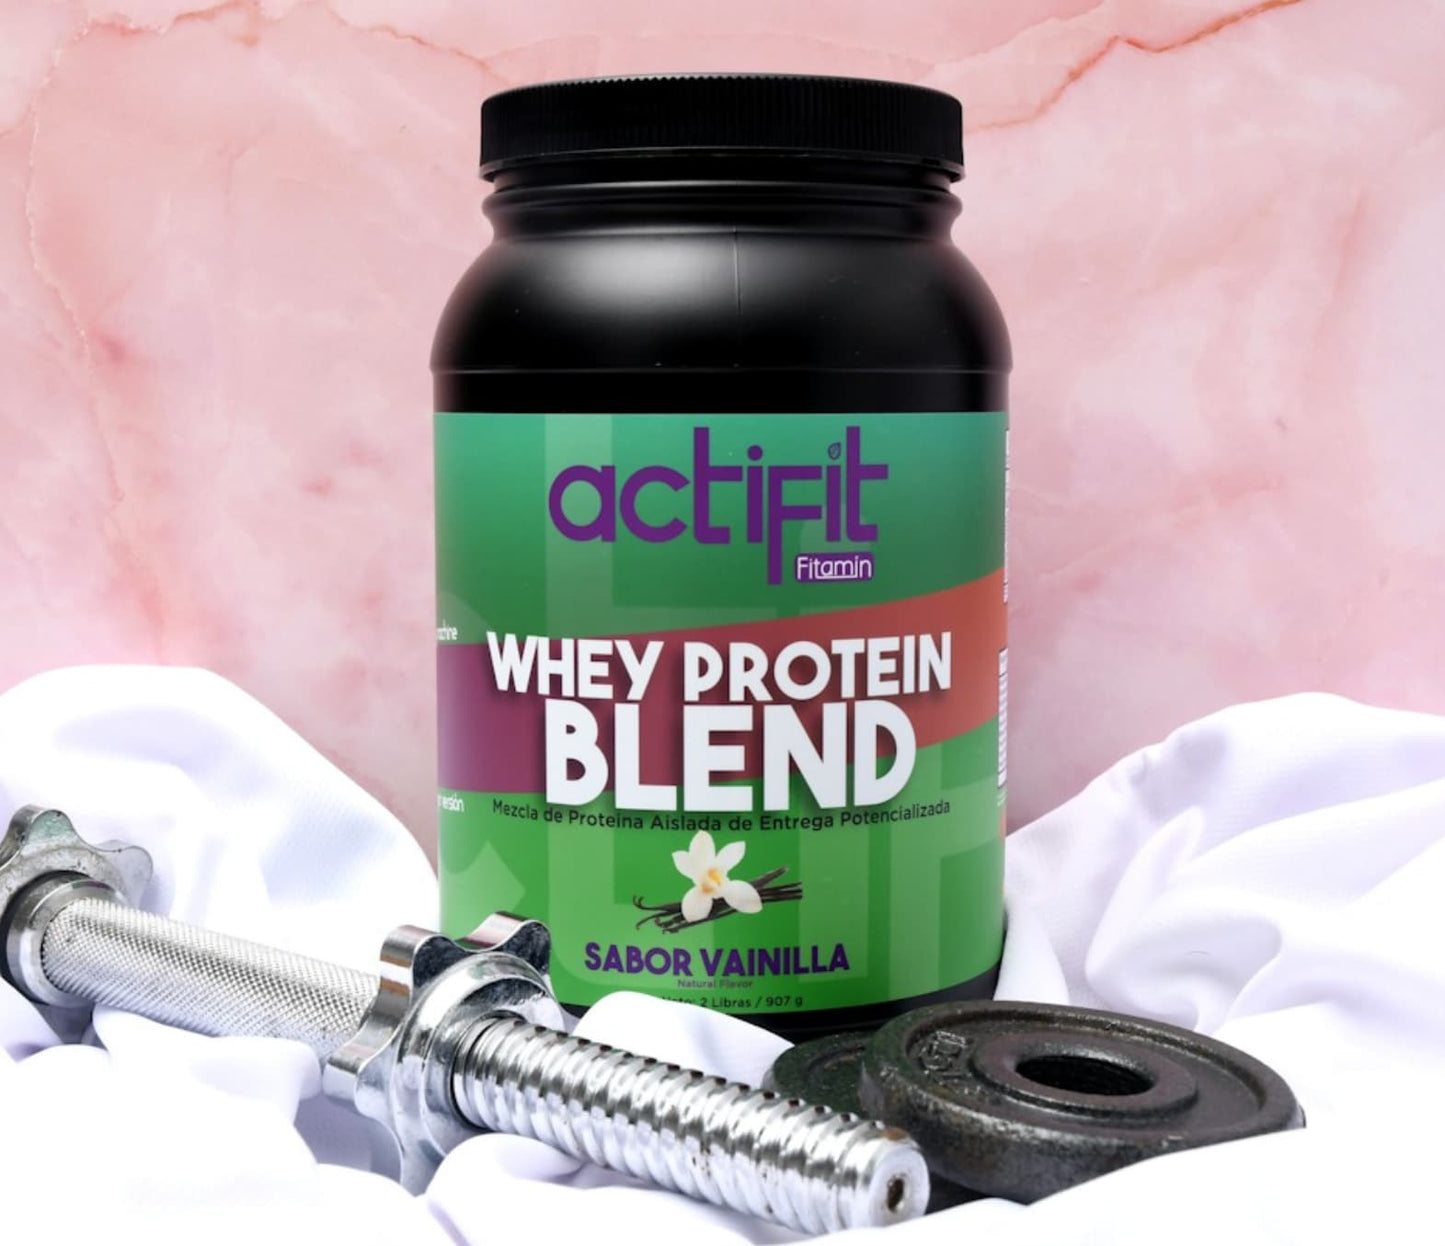 Actifit Whey Protein